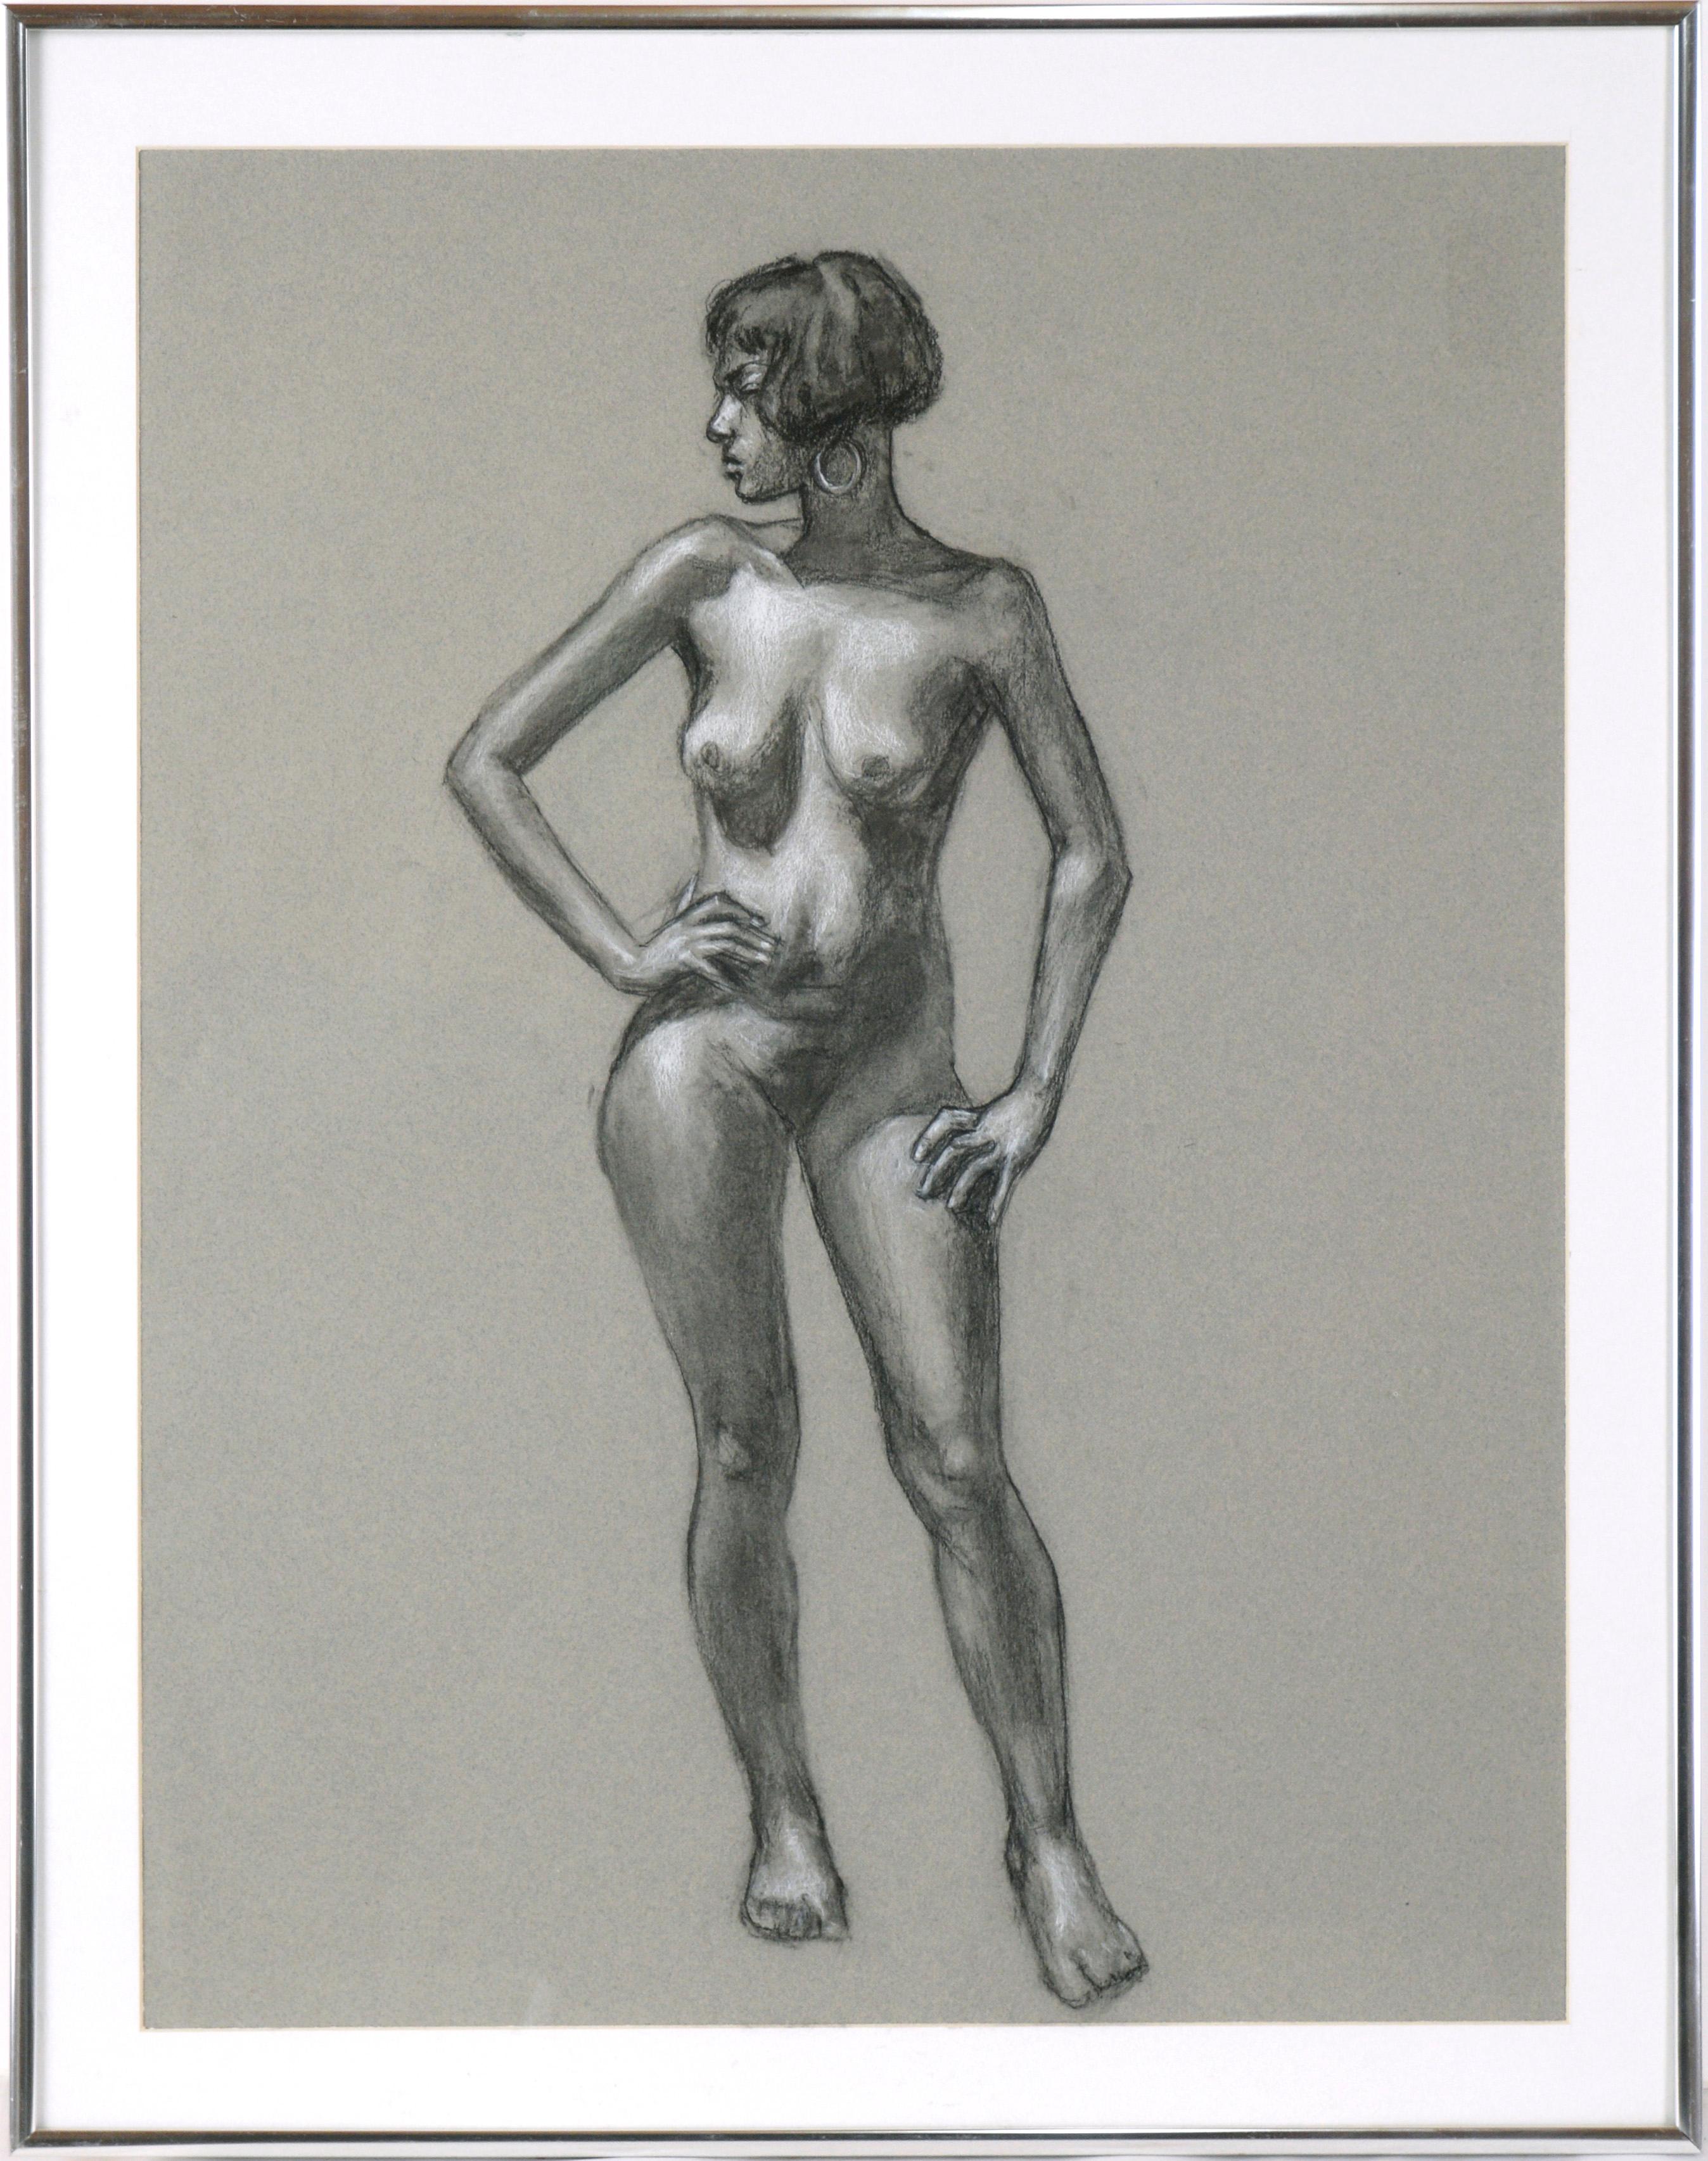 George Wishon Figurative Art - "Standing Figure" Nude in Charcoal and Color Pencil on Paper